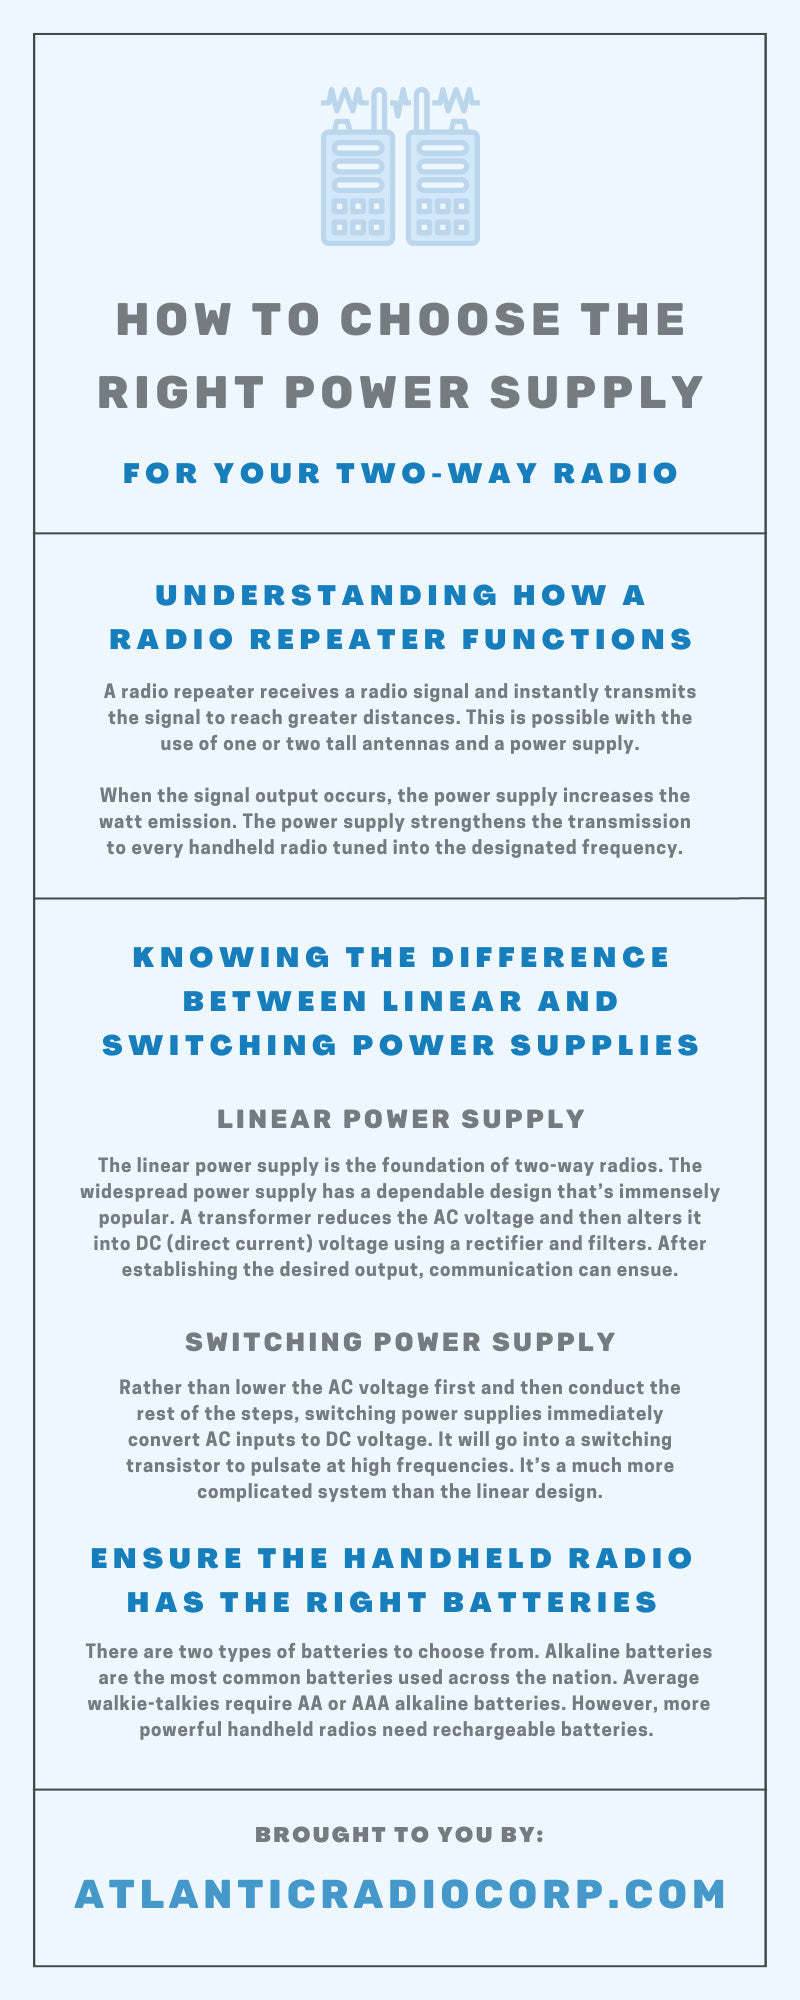 How To Choose the Right Power Supply for Your Two-Way Radio